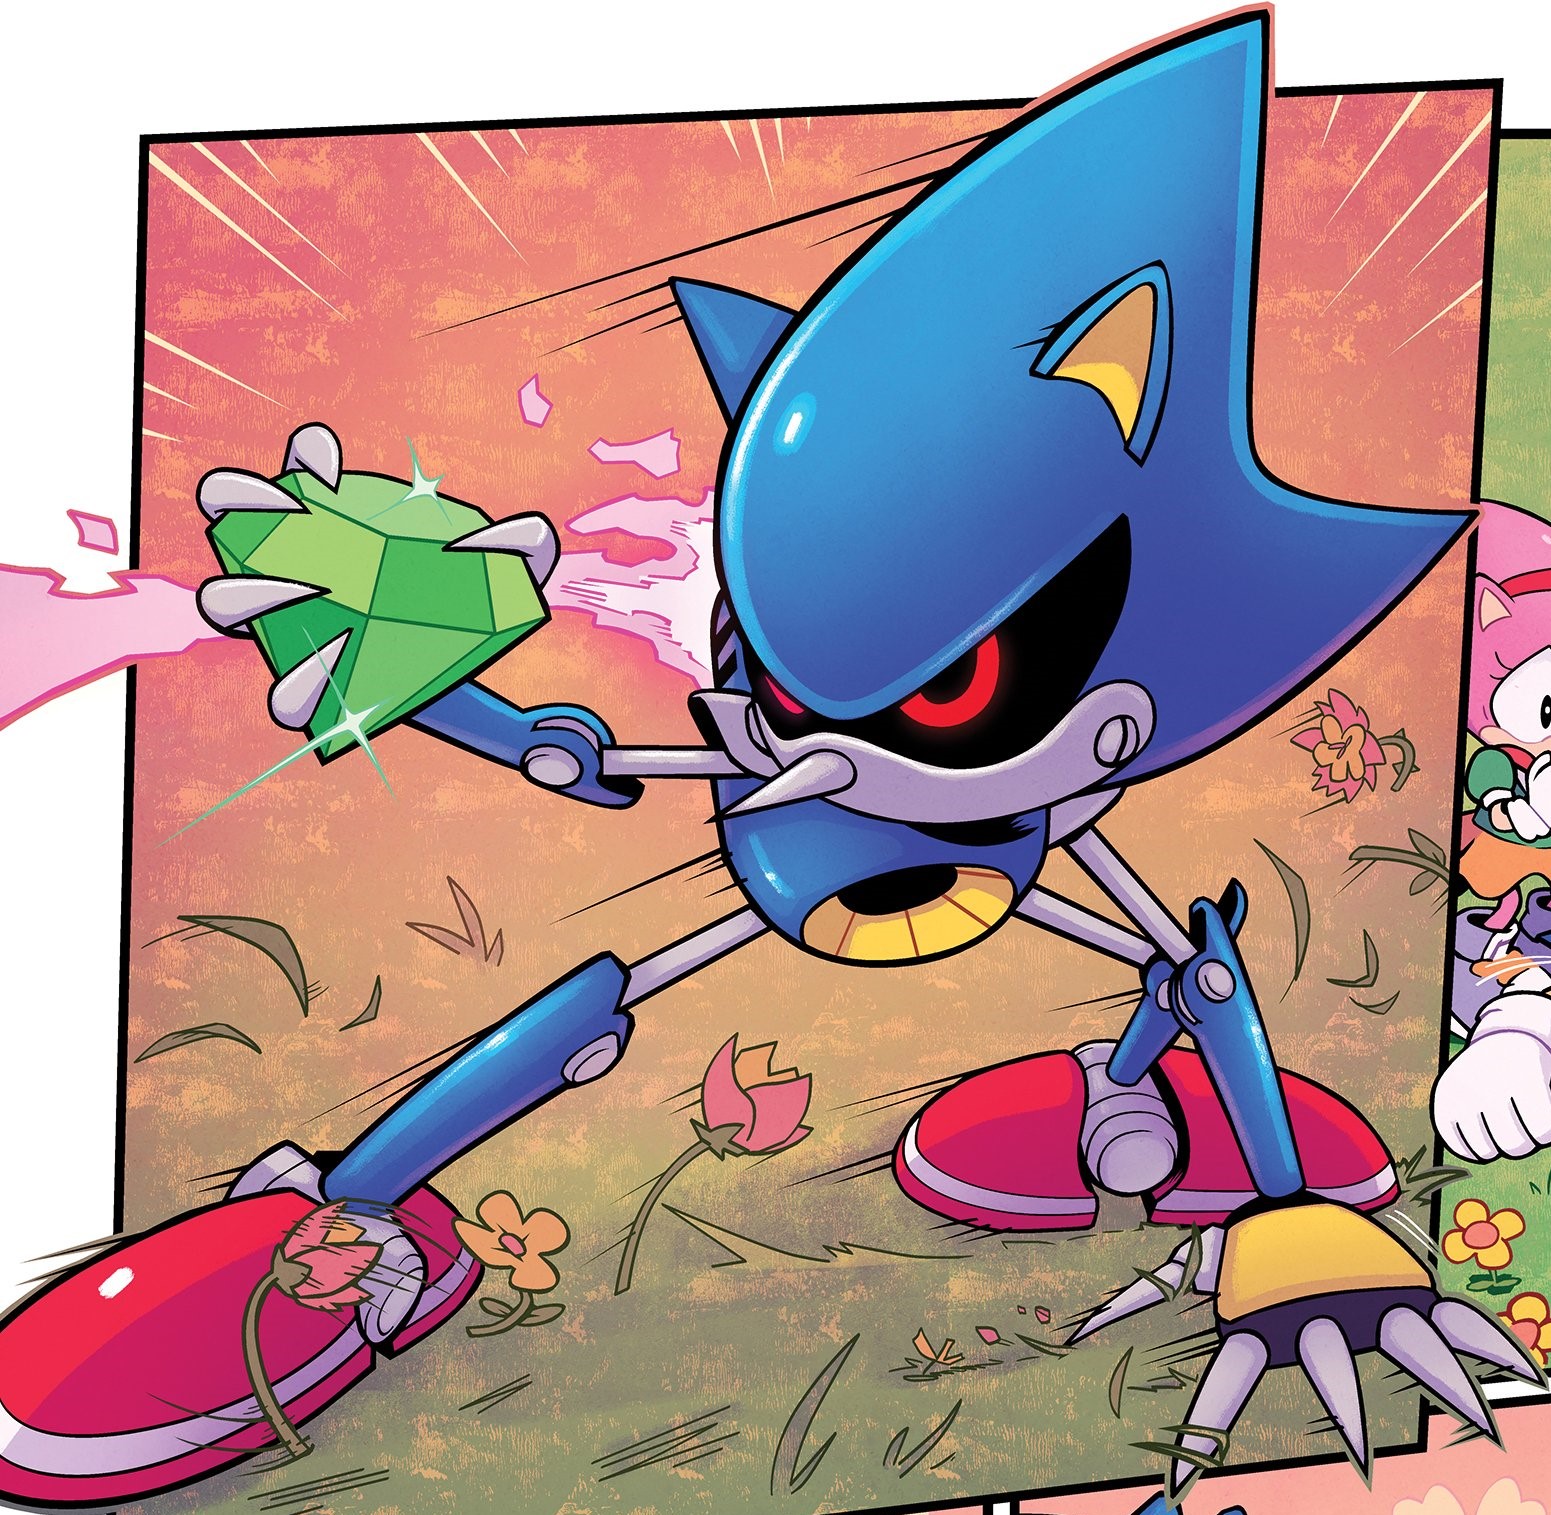 How do people feel about the existence of super neo metal sonic